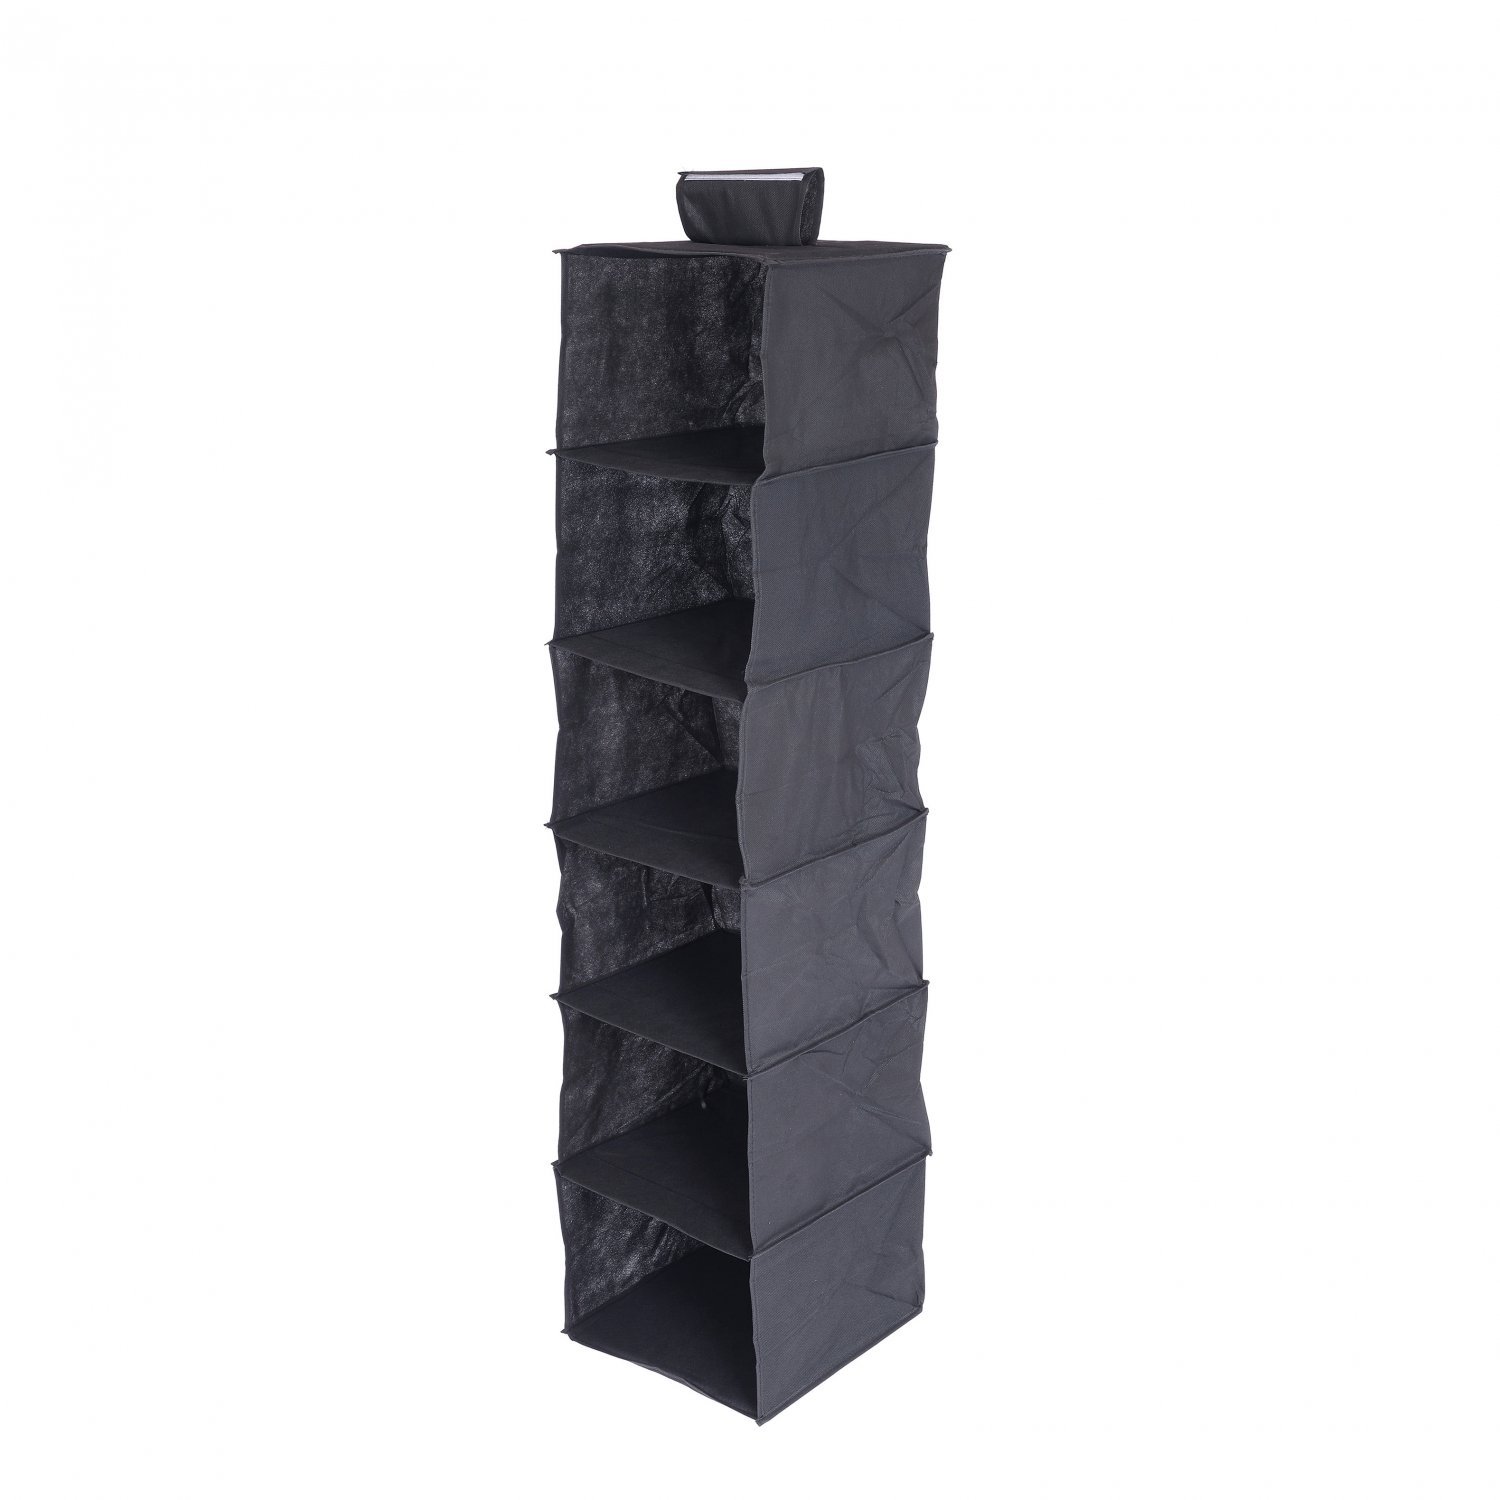 6 Tier Black Canvas Hanging Storage, Lightweight Shelving Material